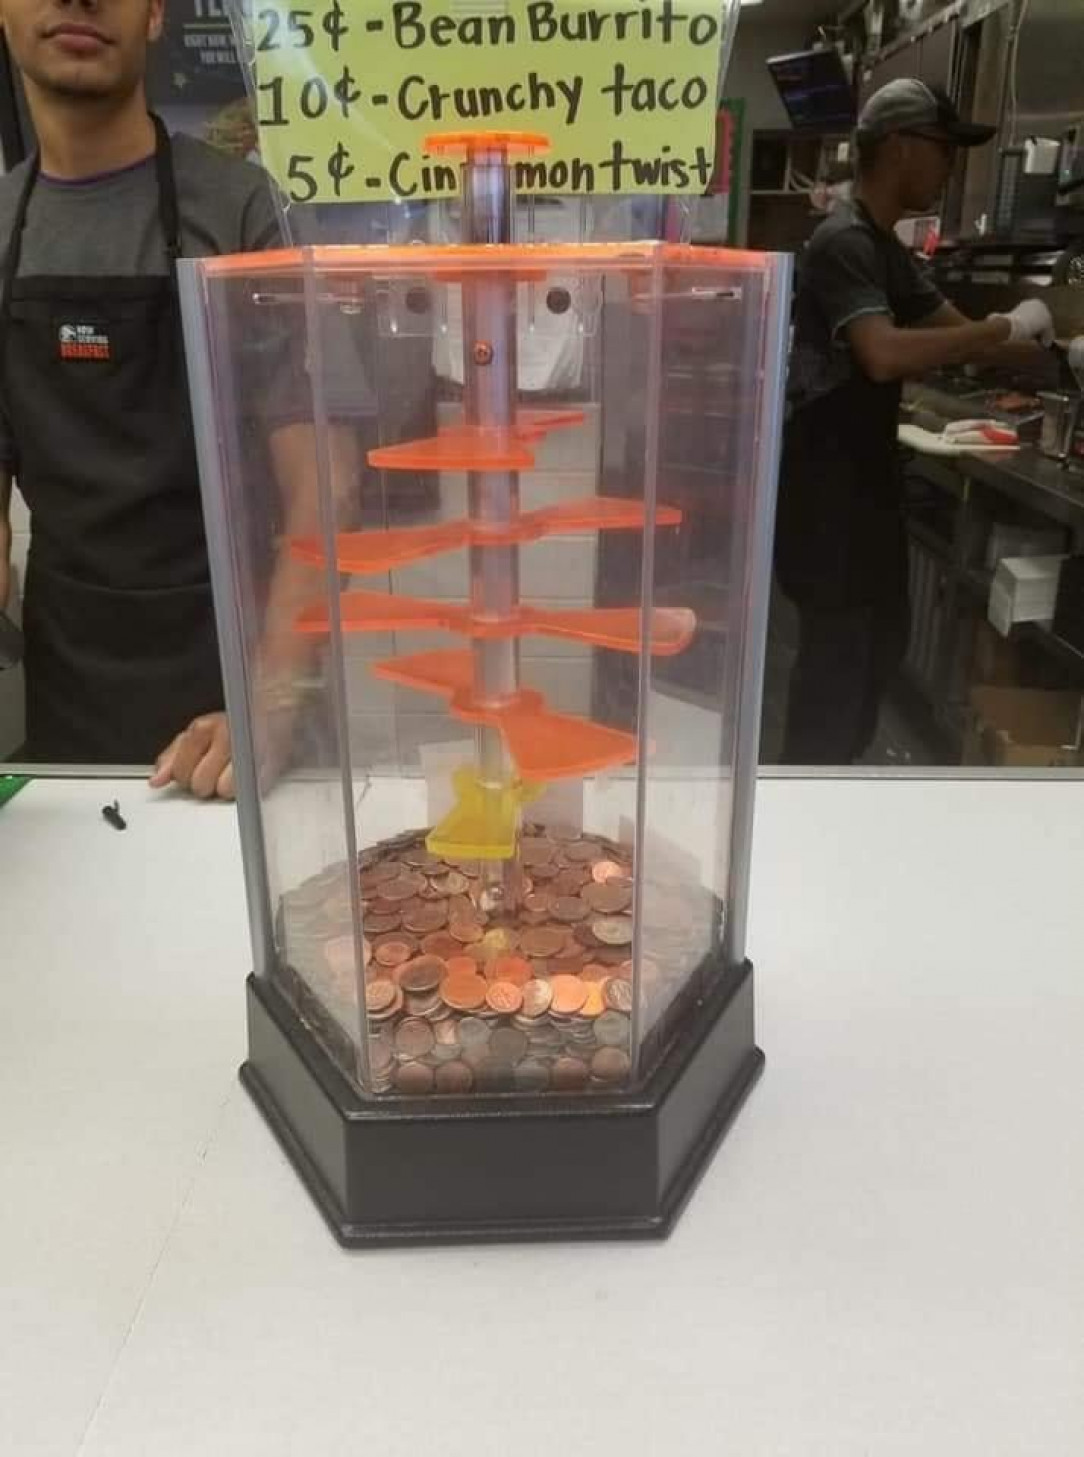 The coin game at Taco Bell